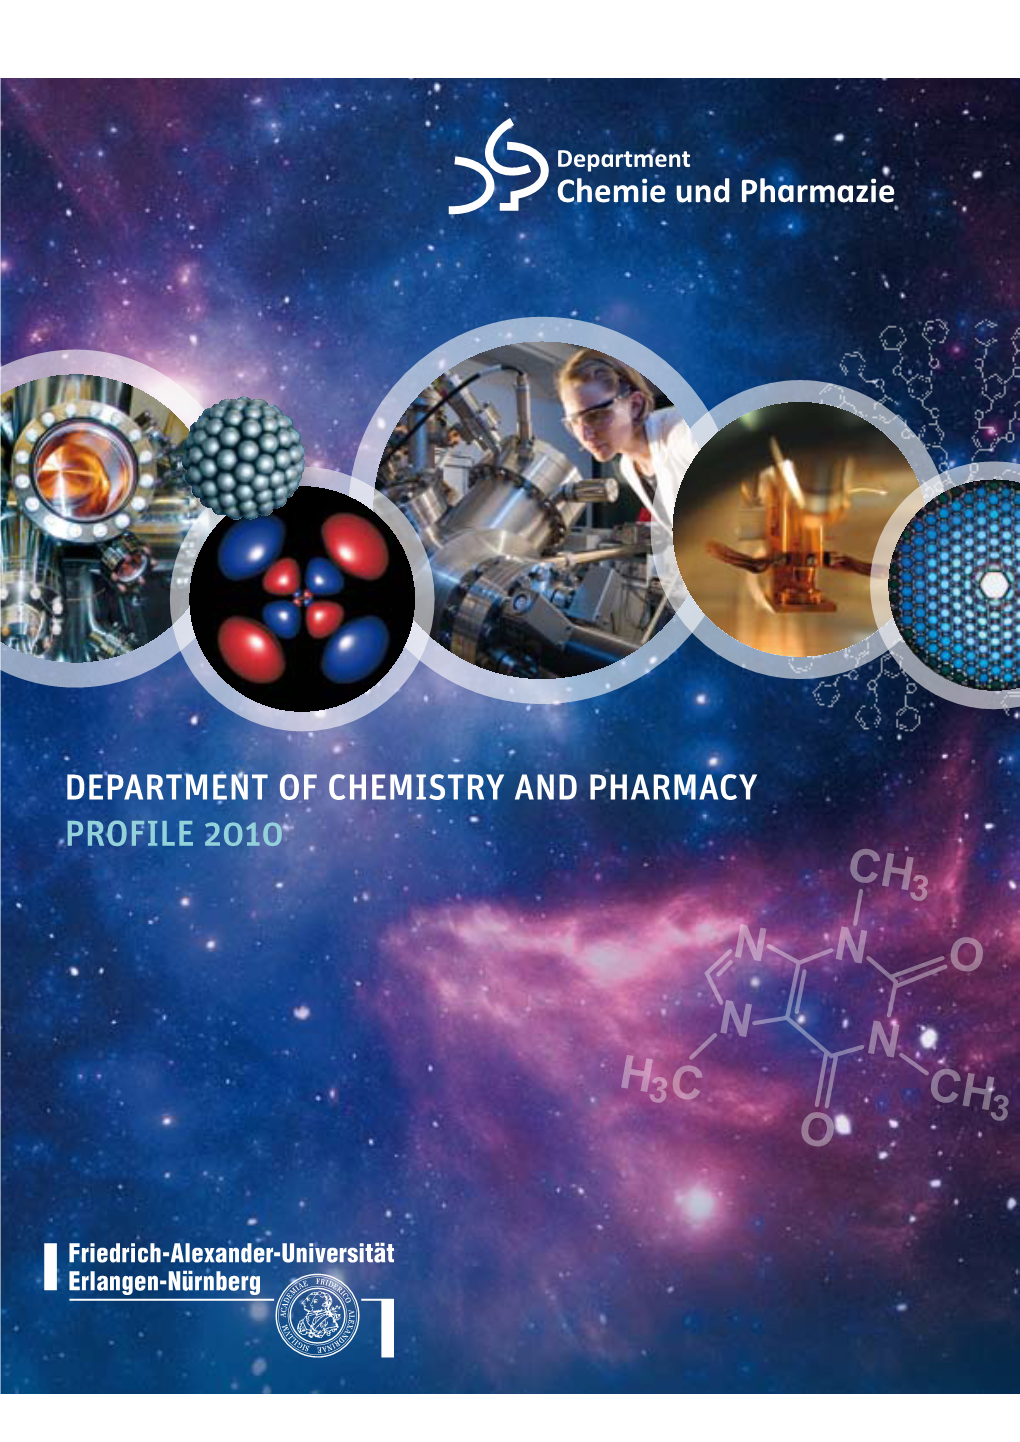 Department of Chemistry and Pharmacy Profile 2010 Editorial 3